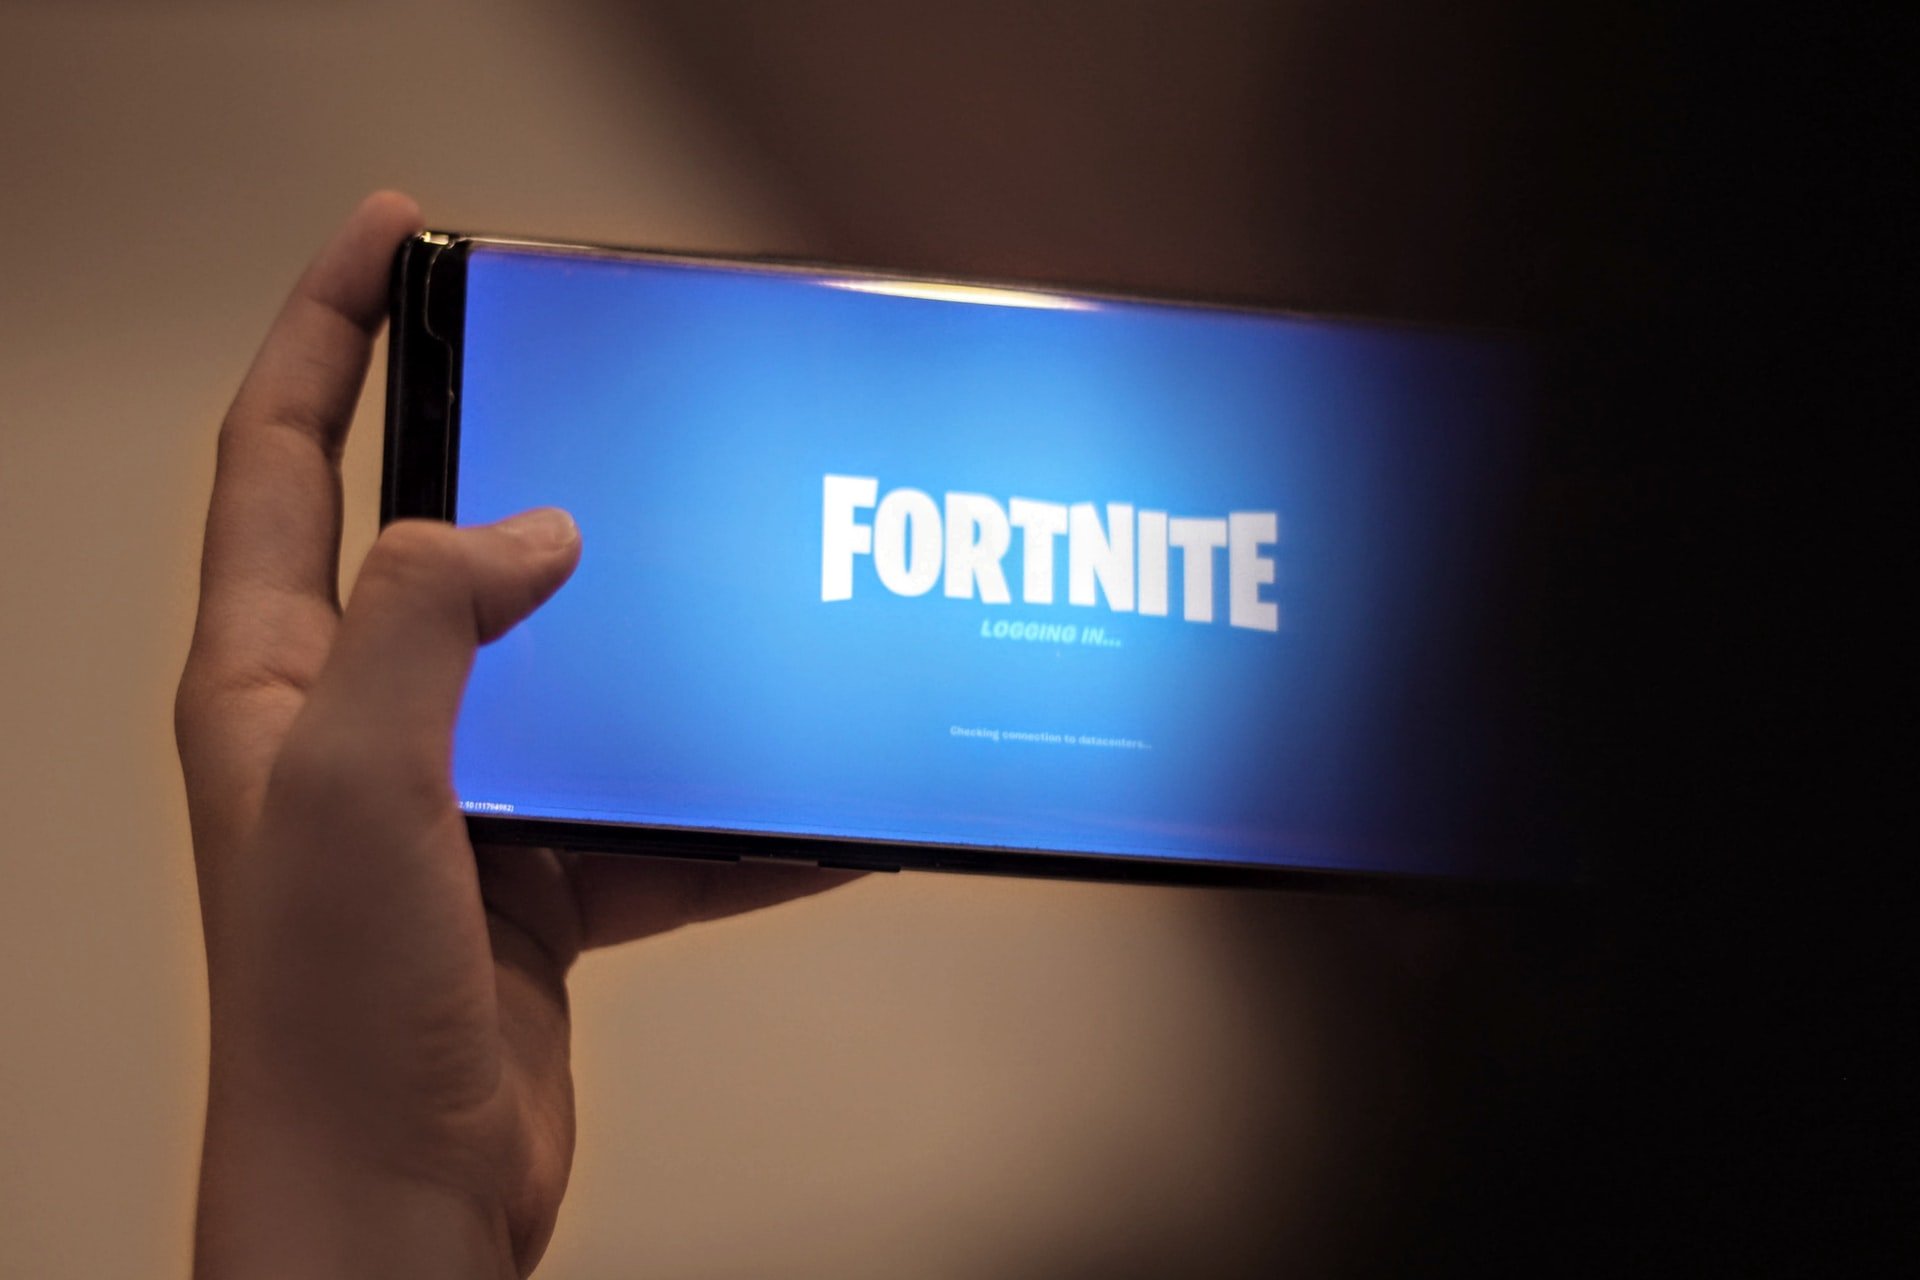 Fortnite game on Android phones